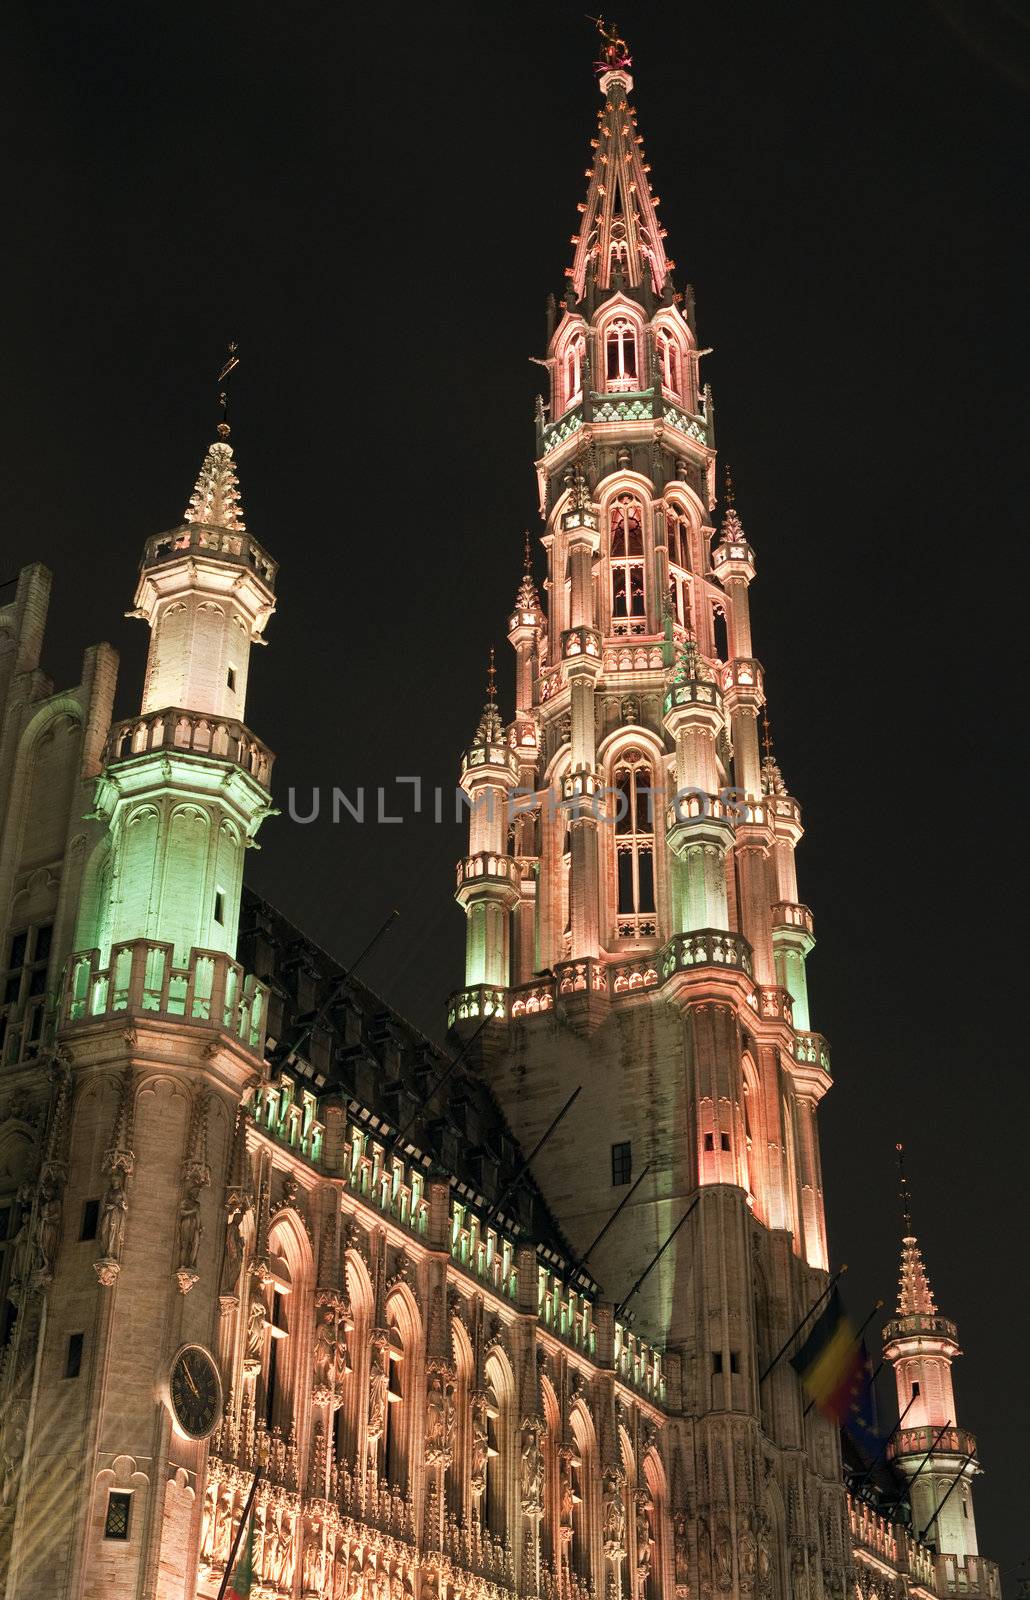 Brussels City Hall (Hotel de Ville) in Grand Place by chrisdorney